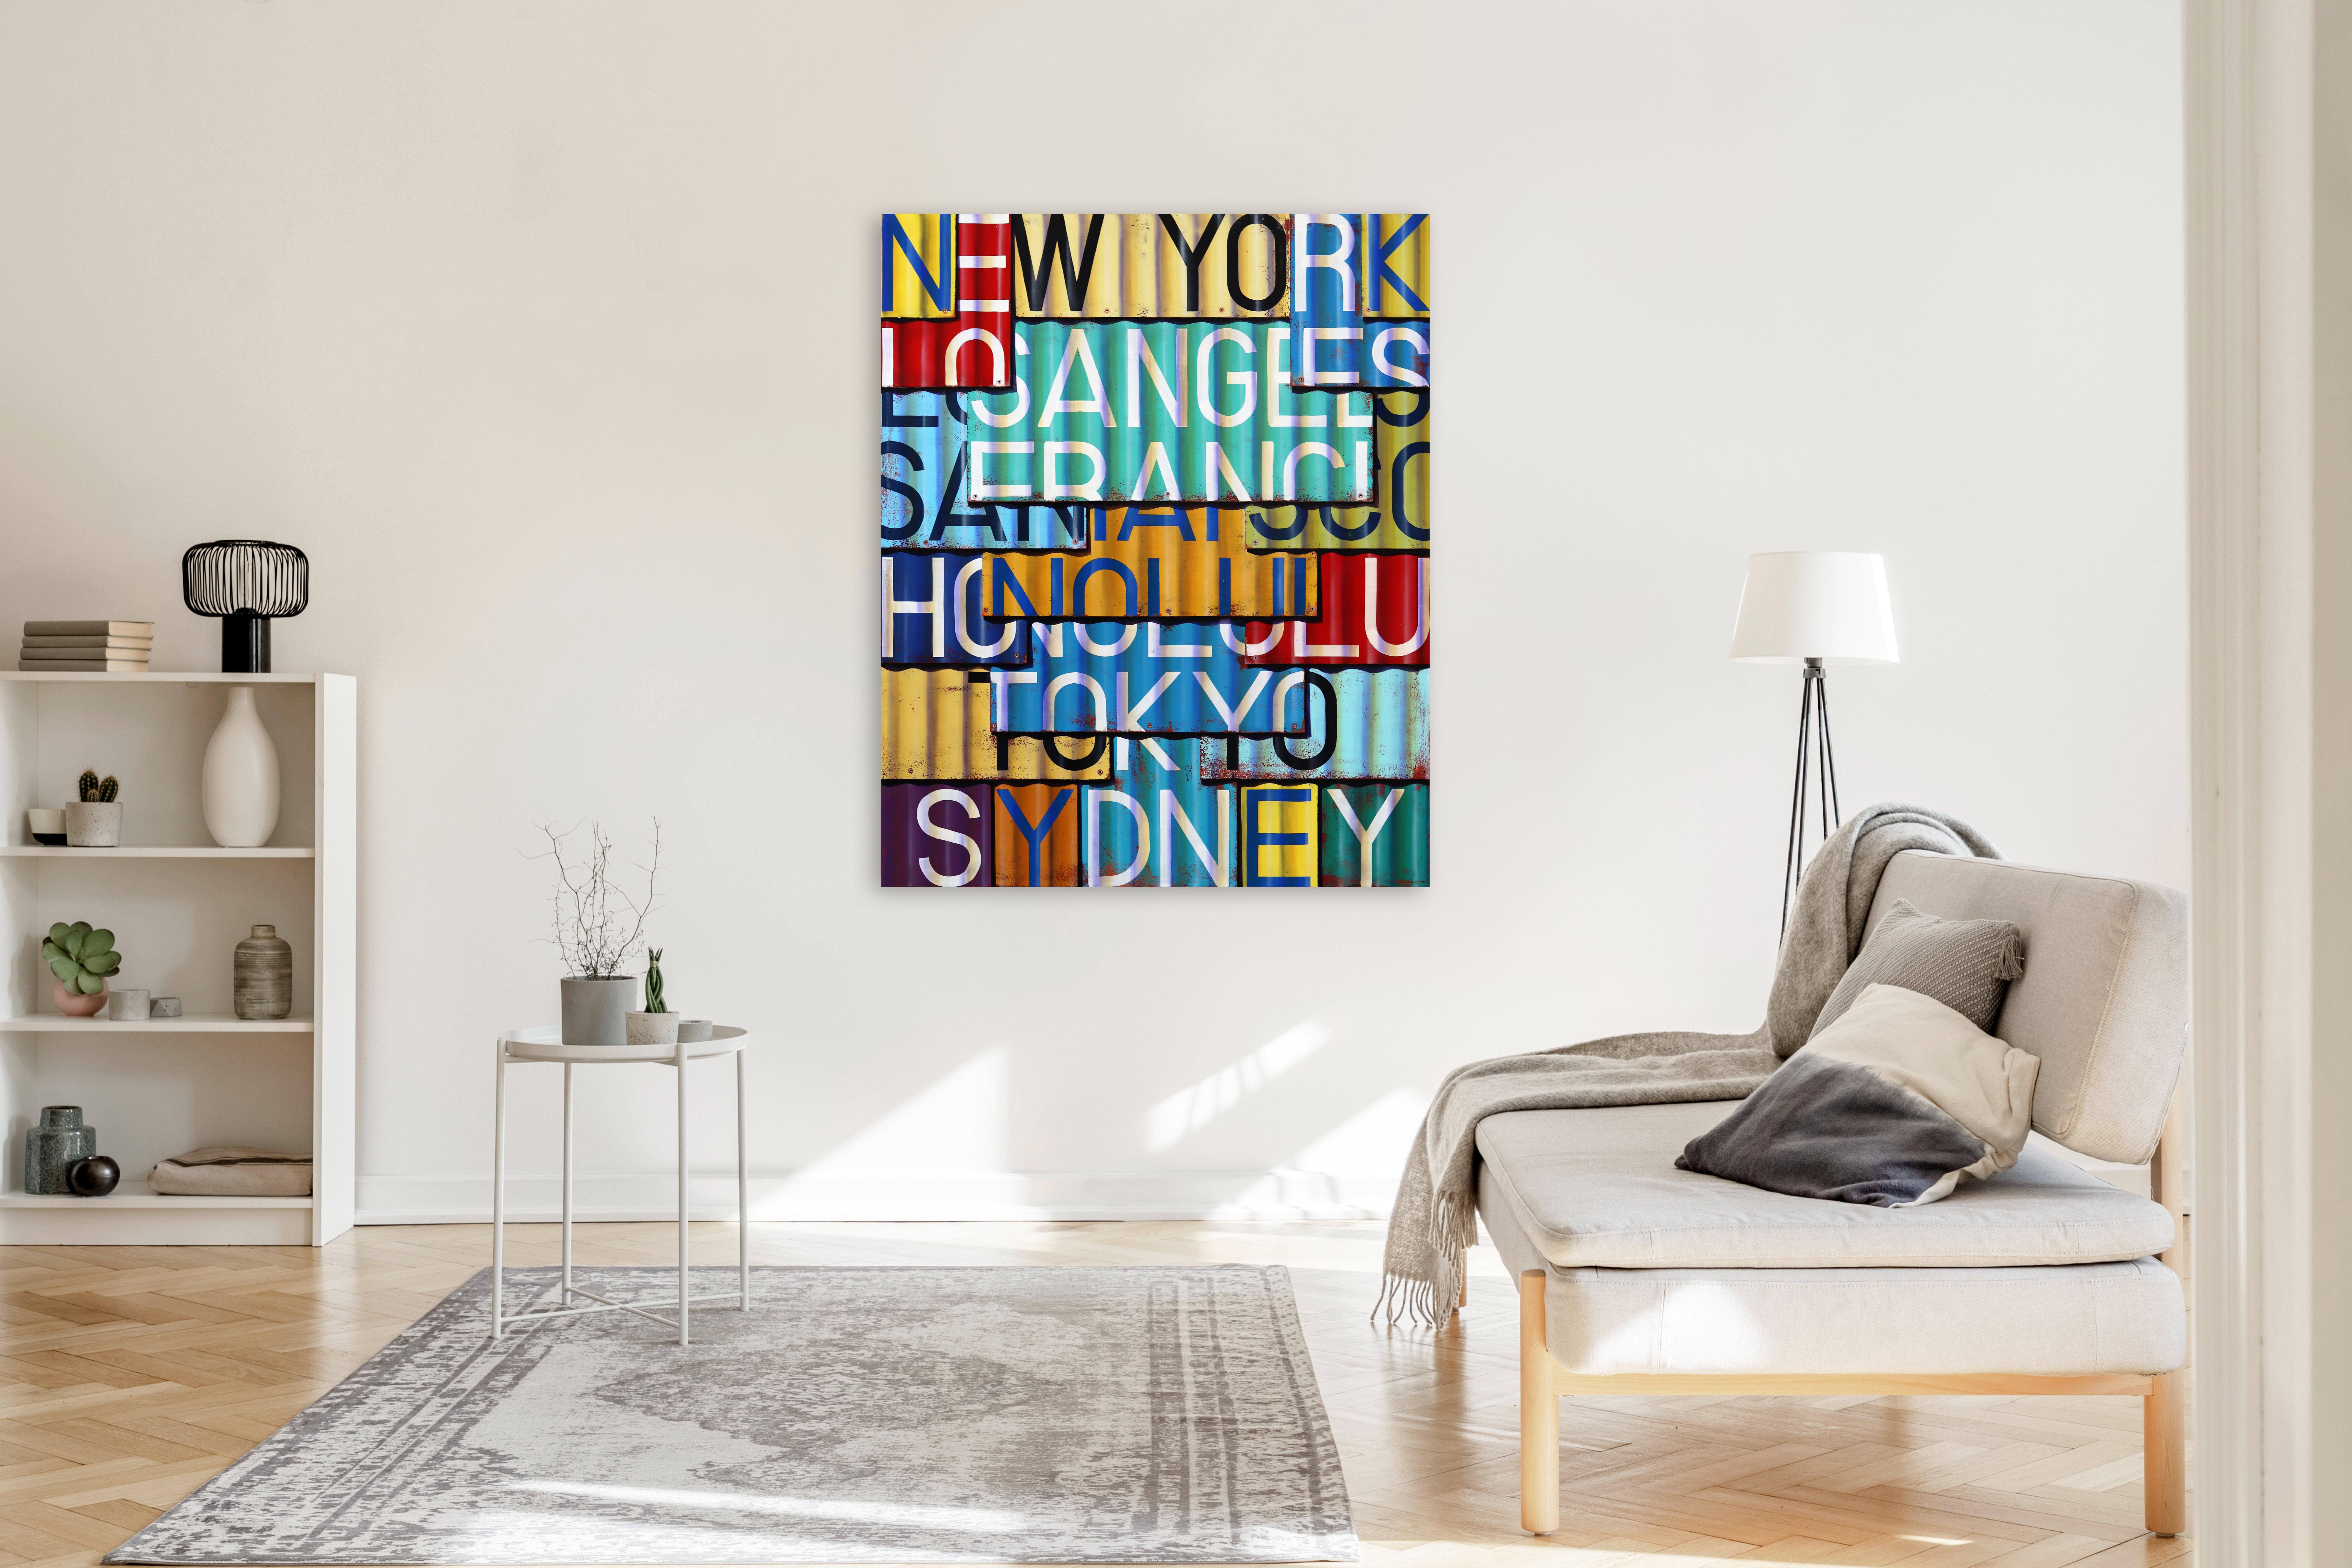 New York to Sydney via LAX, SFO, HNL, & TYO  - Photorealistic Painting on Canvas For Sale 4